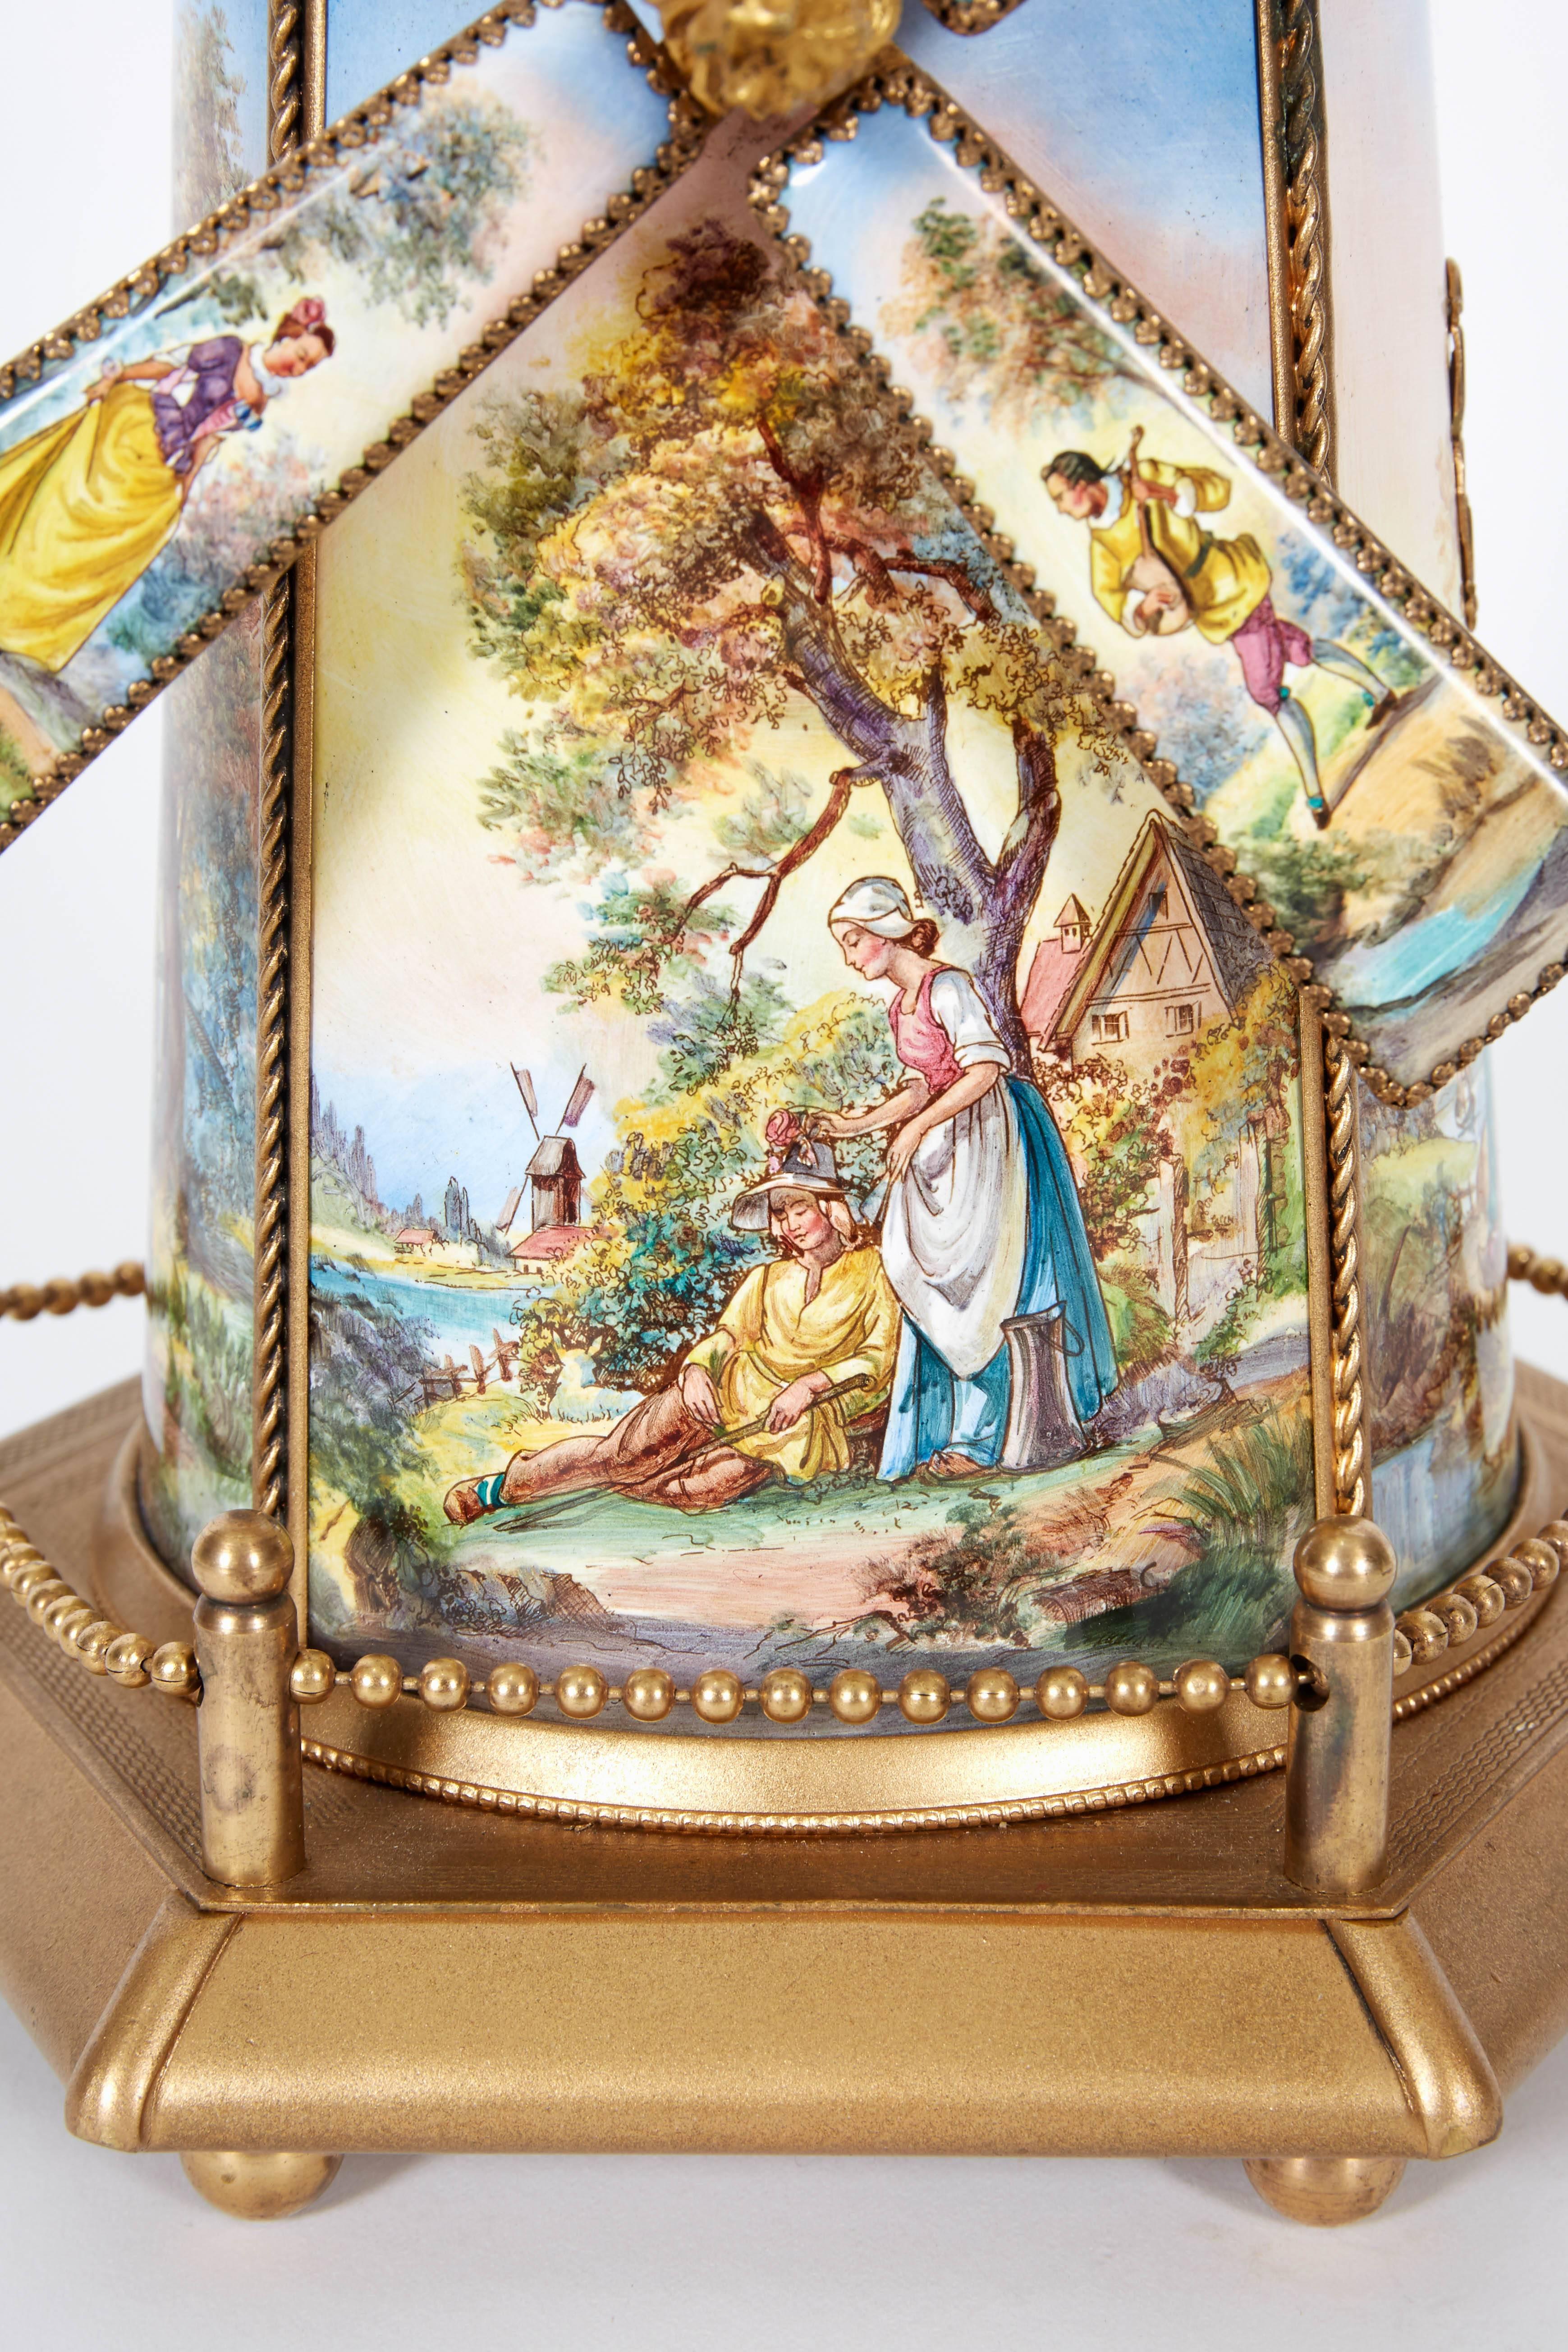 A large antique Viennese / Austrian enamel and bronze Windmill Musical jewelry box and cover,
circa 1910

Hand-painted, windmill form box and cover. Plays music when you wind it, windmill turns when music is being played.

Excellent